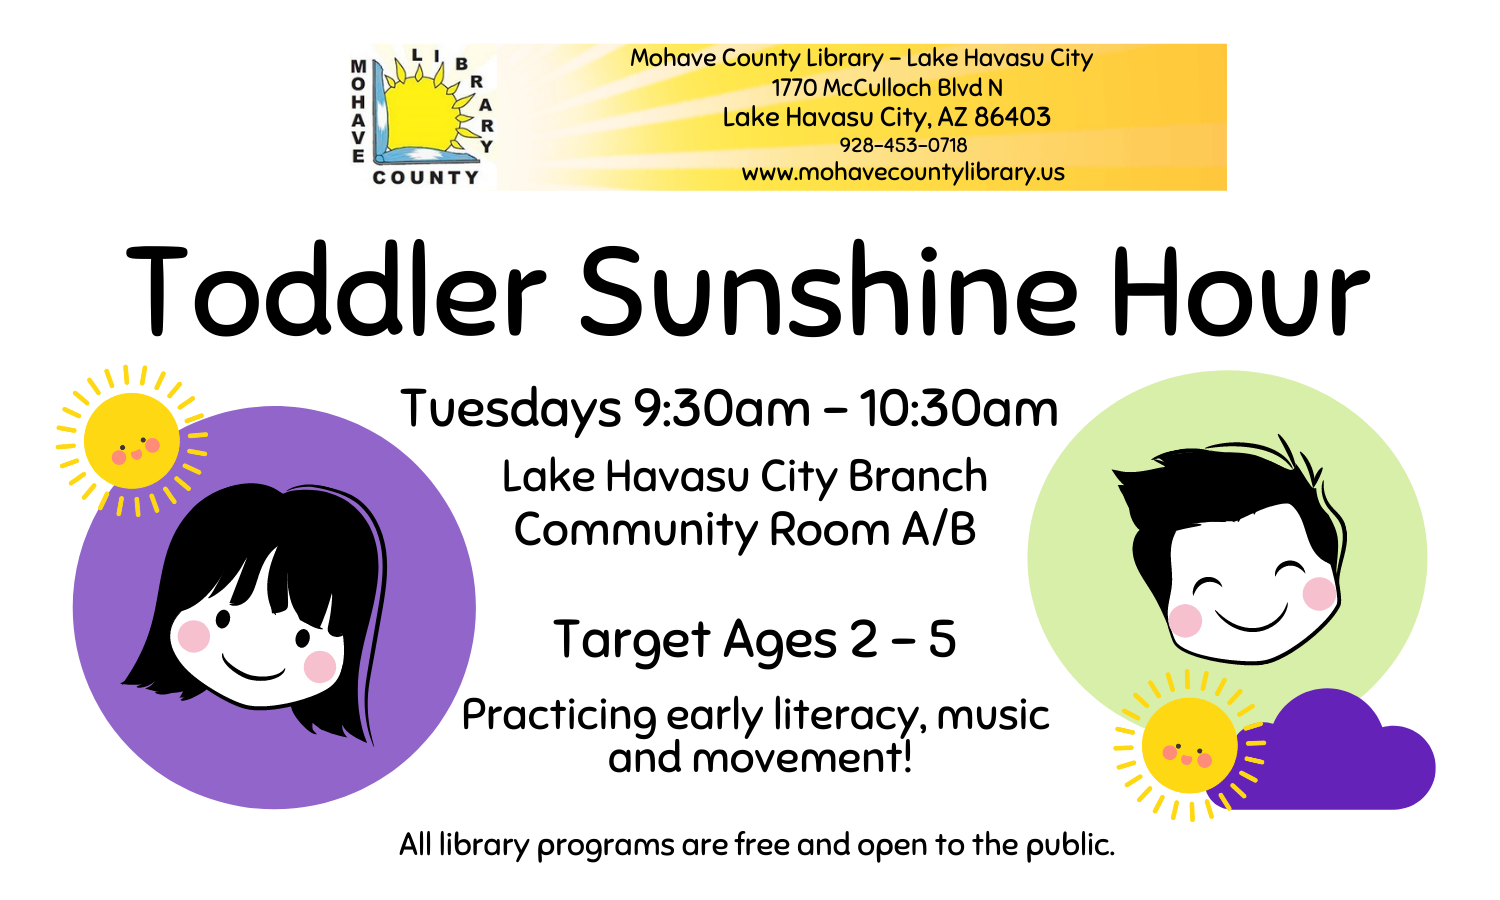 Toddler Sunshine Hour at the Library